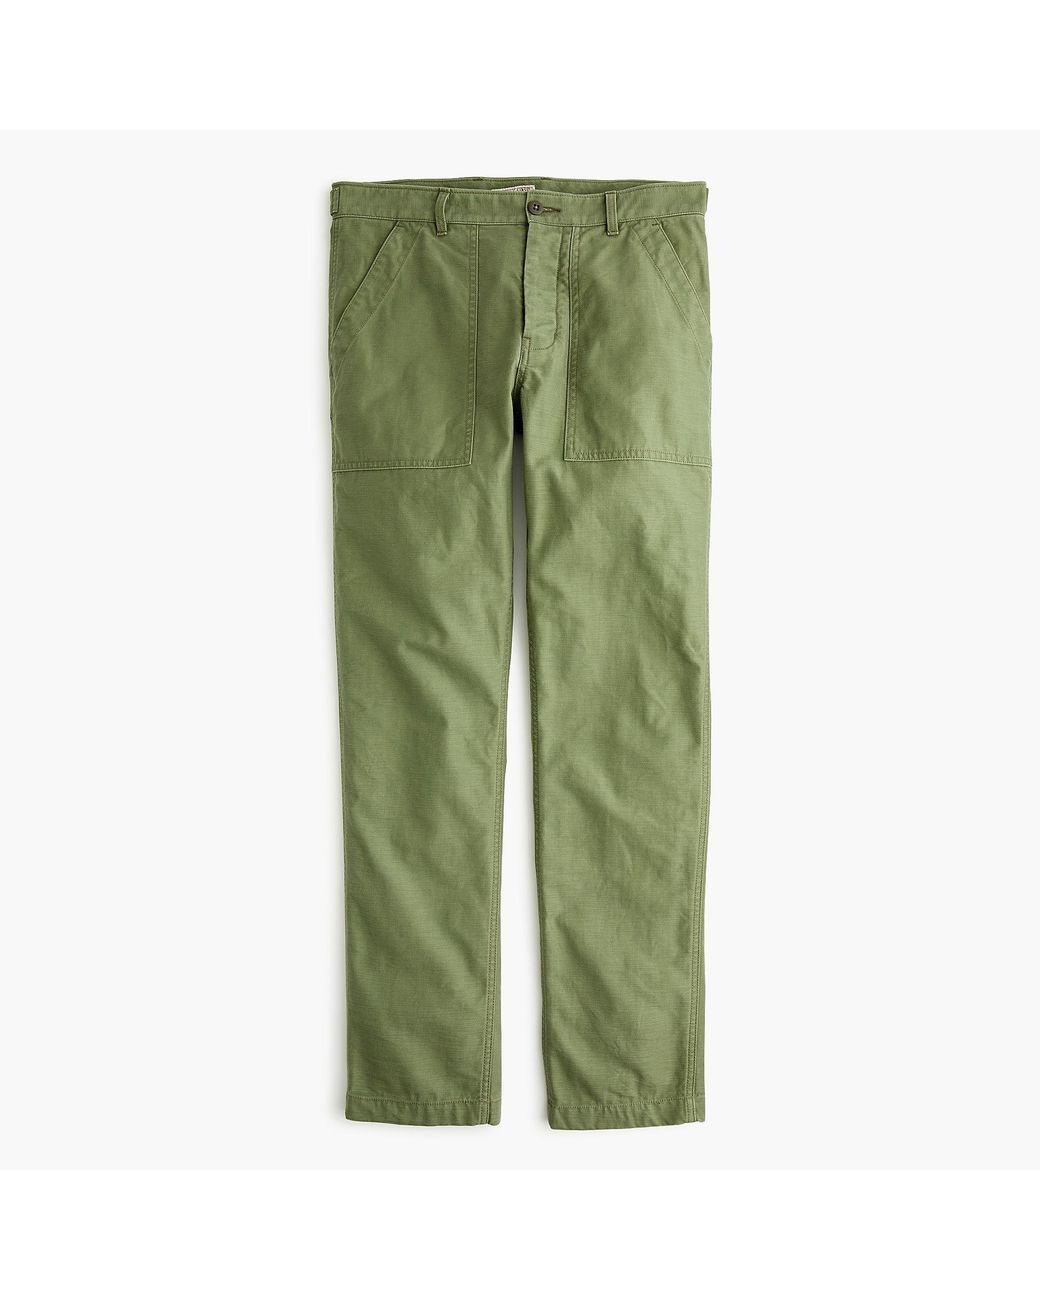 J.Crew Wallace & Barnes Olive Camp Pant in Green for Men